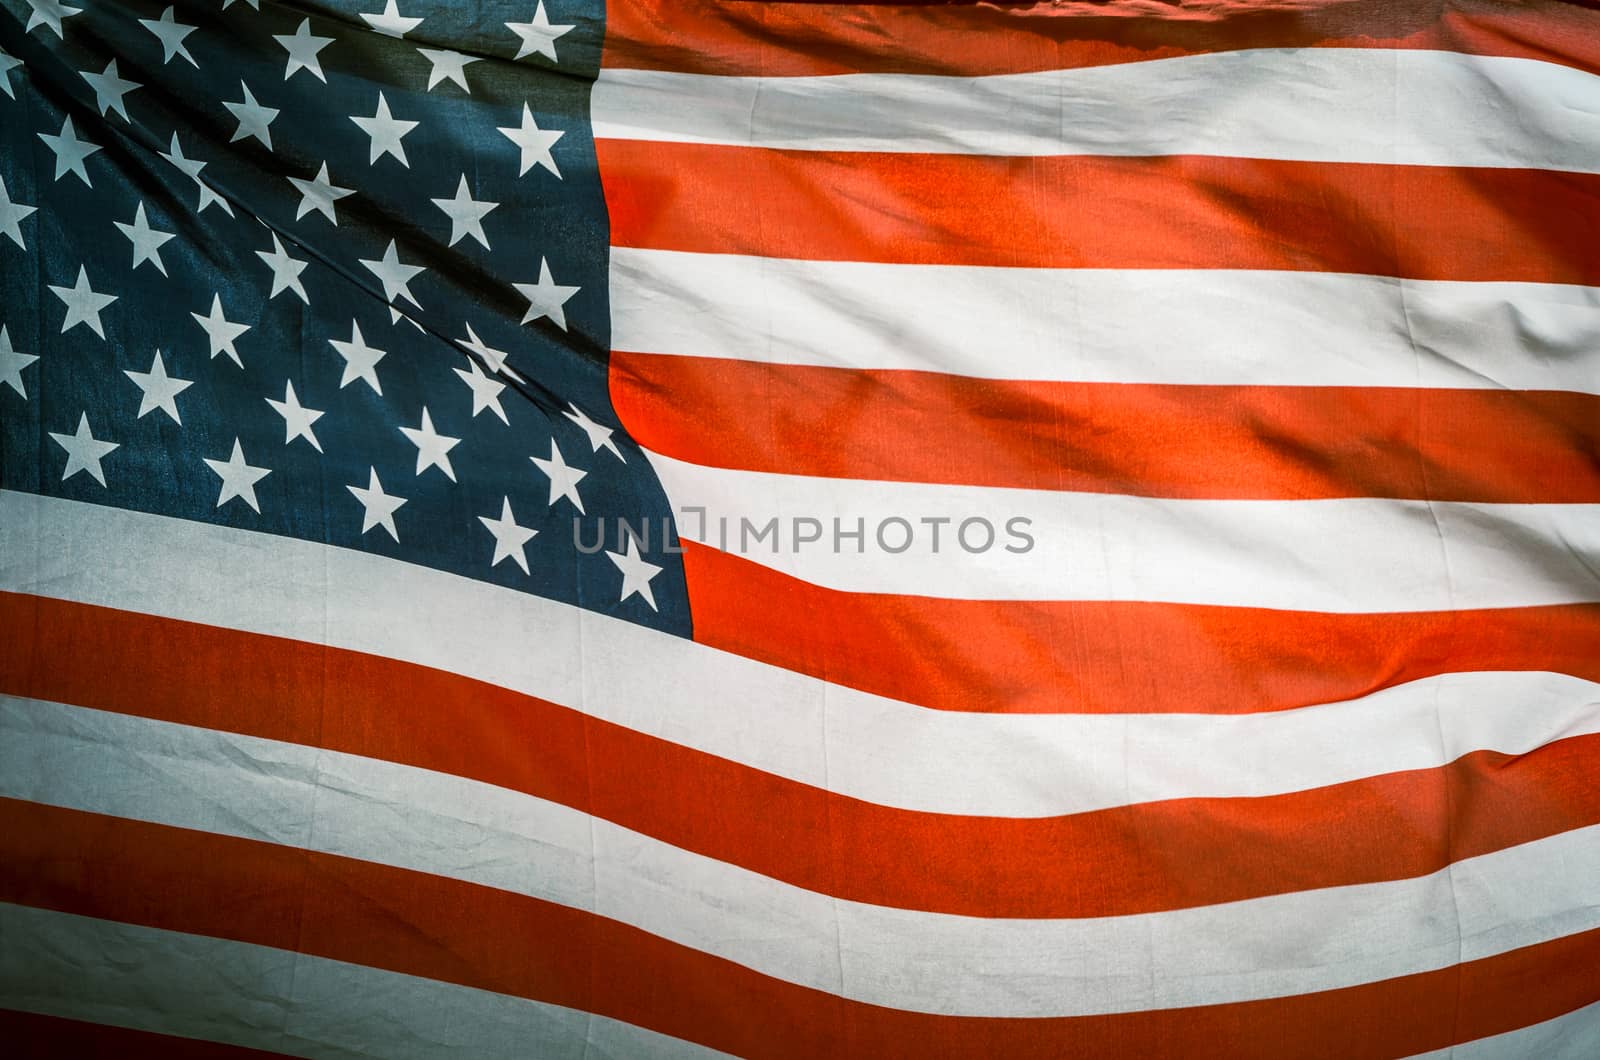 Retro Filtered Photo Of USA Stars And Stripes Flag In The Wind